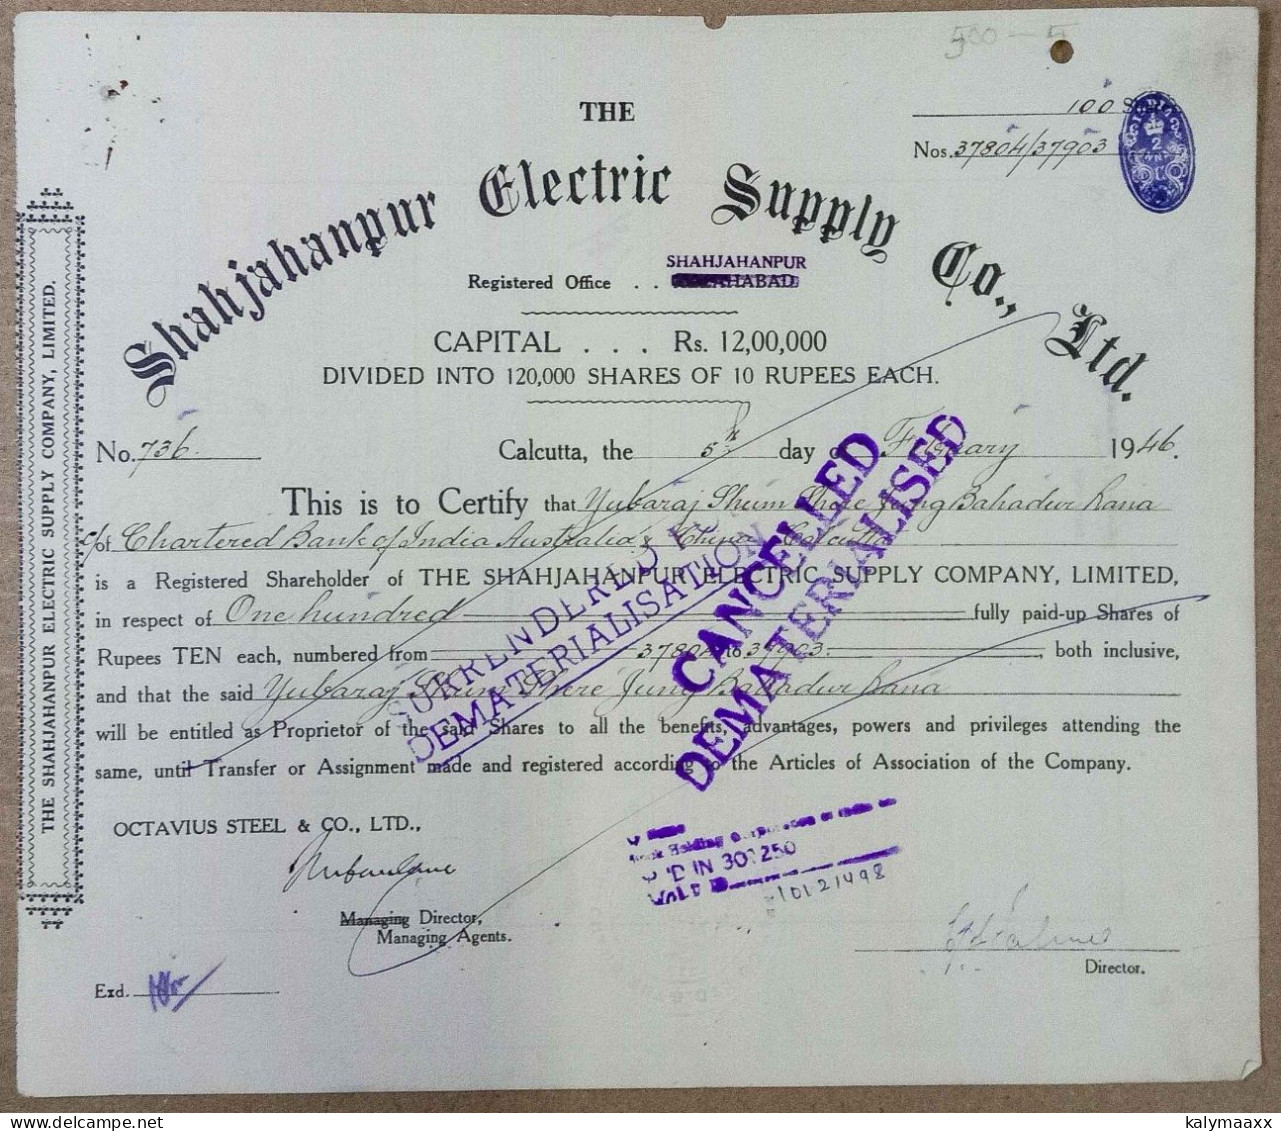 BRITISH INDIA 1946 THE SHAHJAHANPUR ELECTRIC SUPPLY COMPANY LIMITED, ELECTRICITY....SHARE CERTIFICATE - Electricité & Gaz